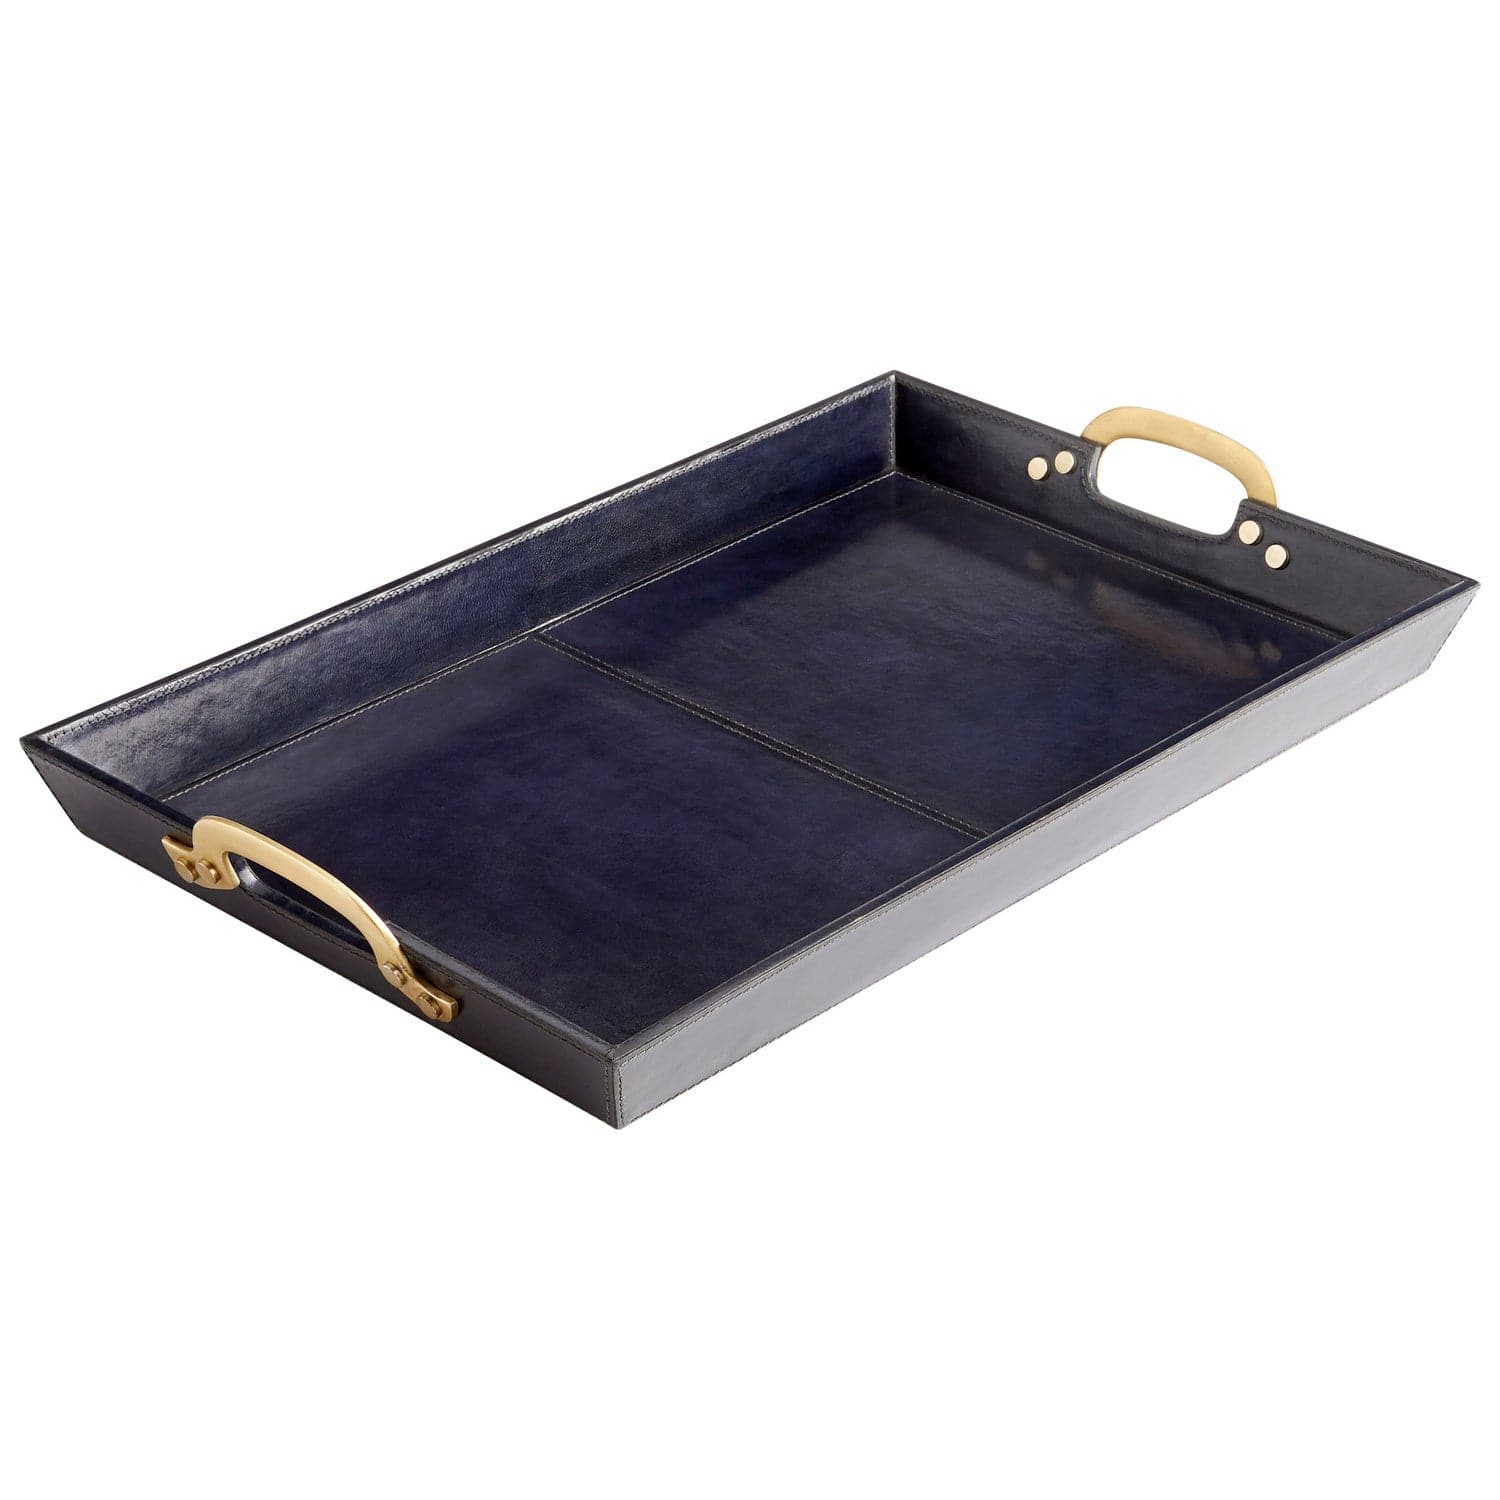 Cyan - 10718 - Tray - Blue And Antique Brass